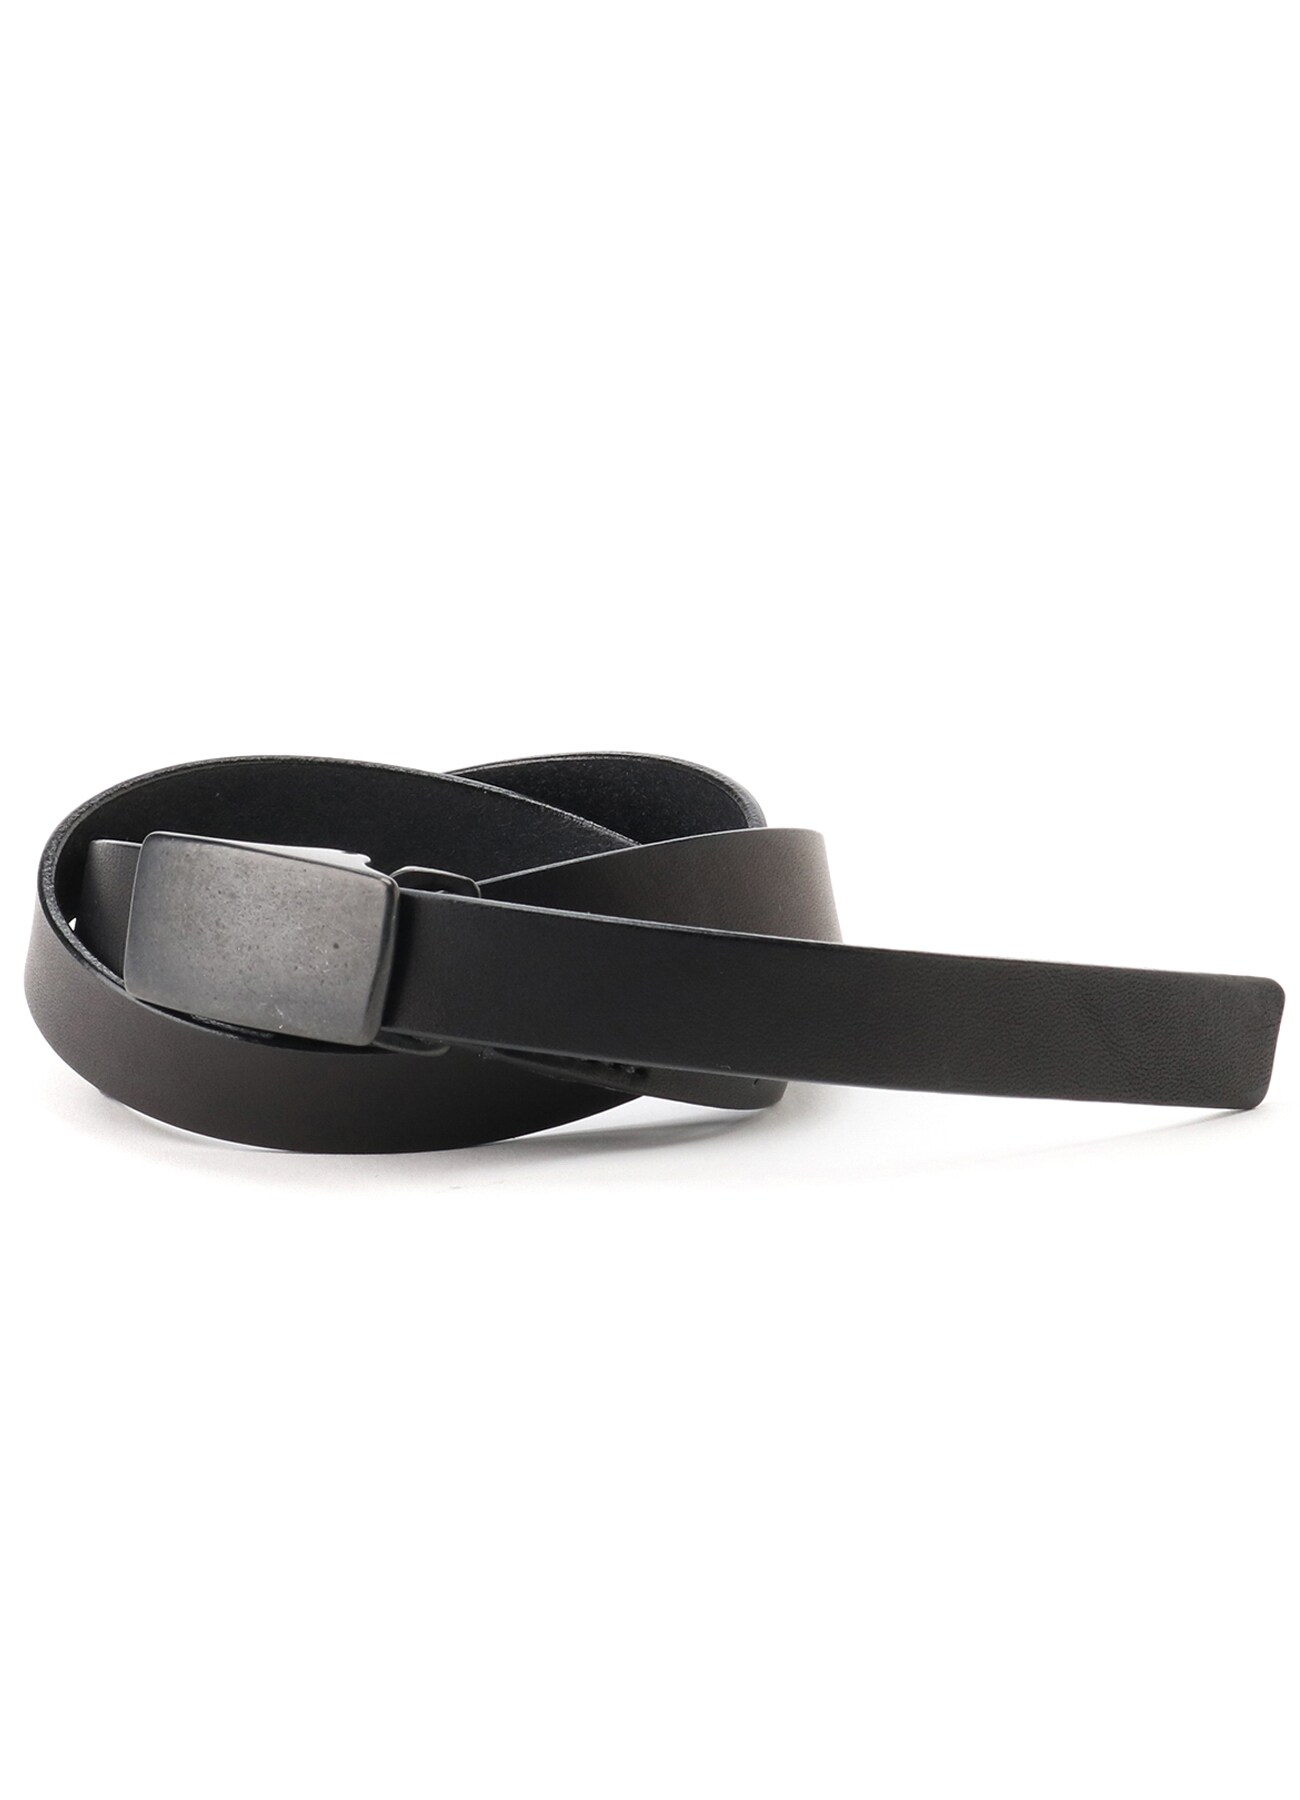 THICK SOFT LEATHER 18MM FREE BELT